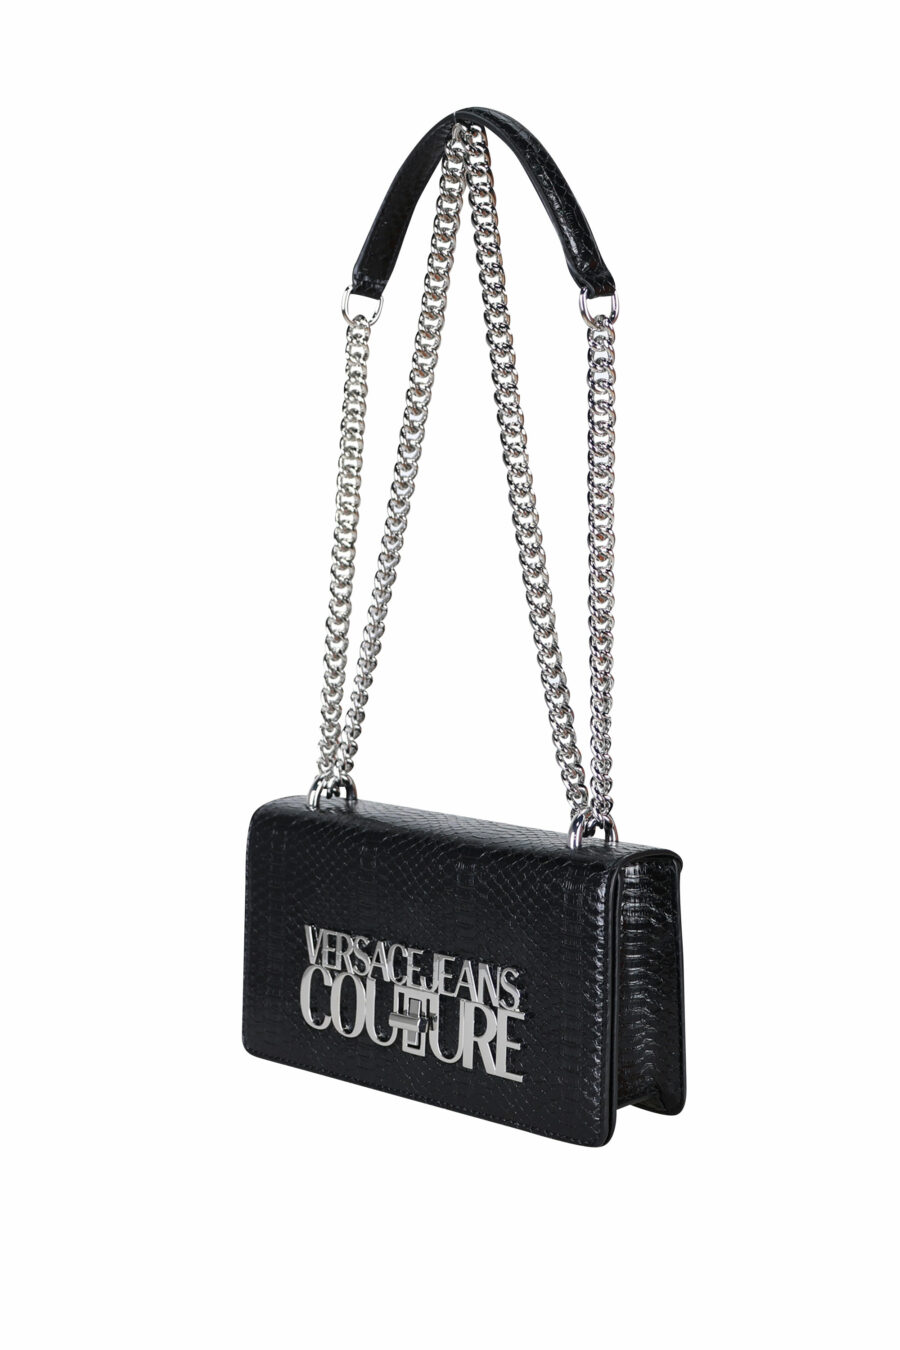 Black shoulder bag with snake texture "flap" with silver maxilogo "lettering" - 8052019408416 1